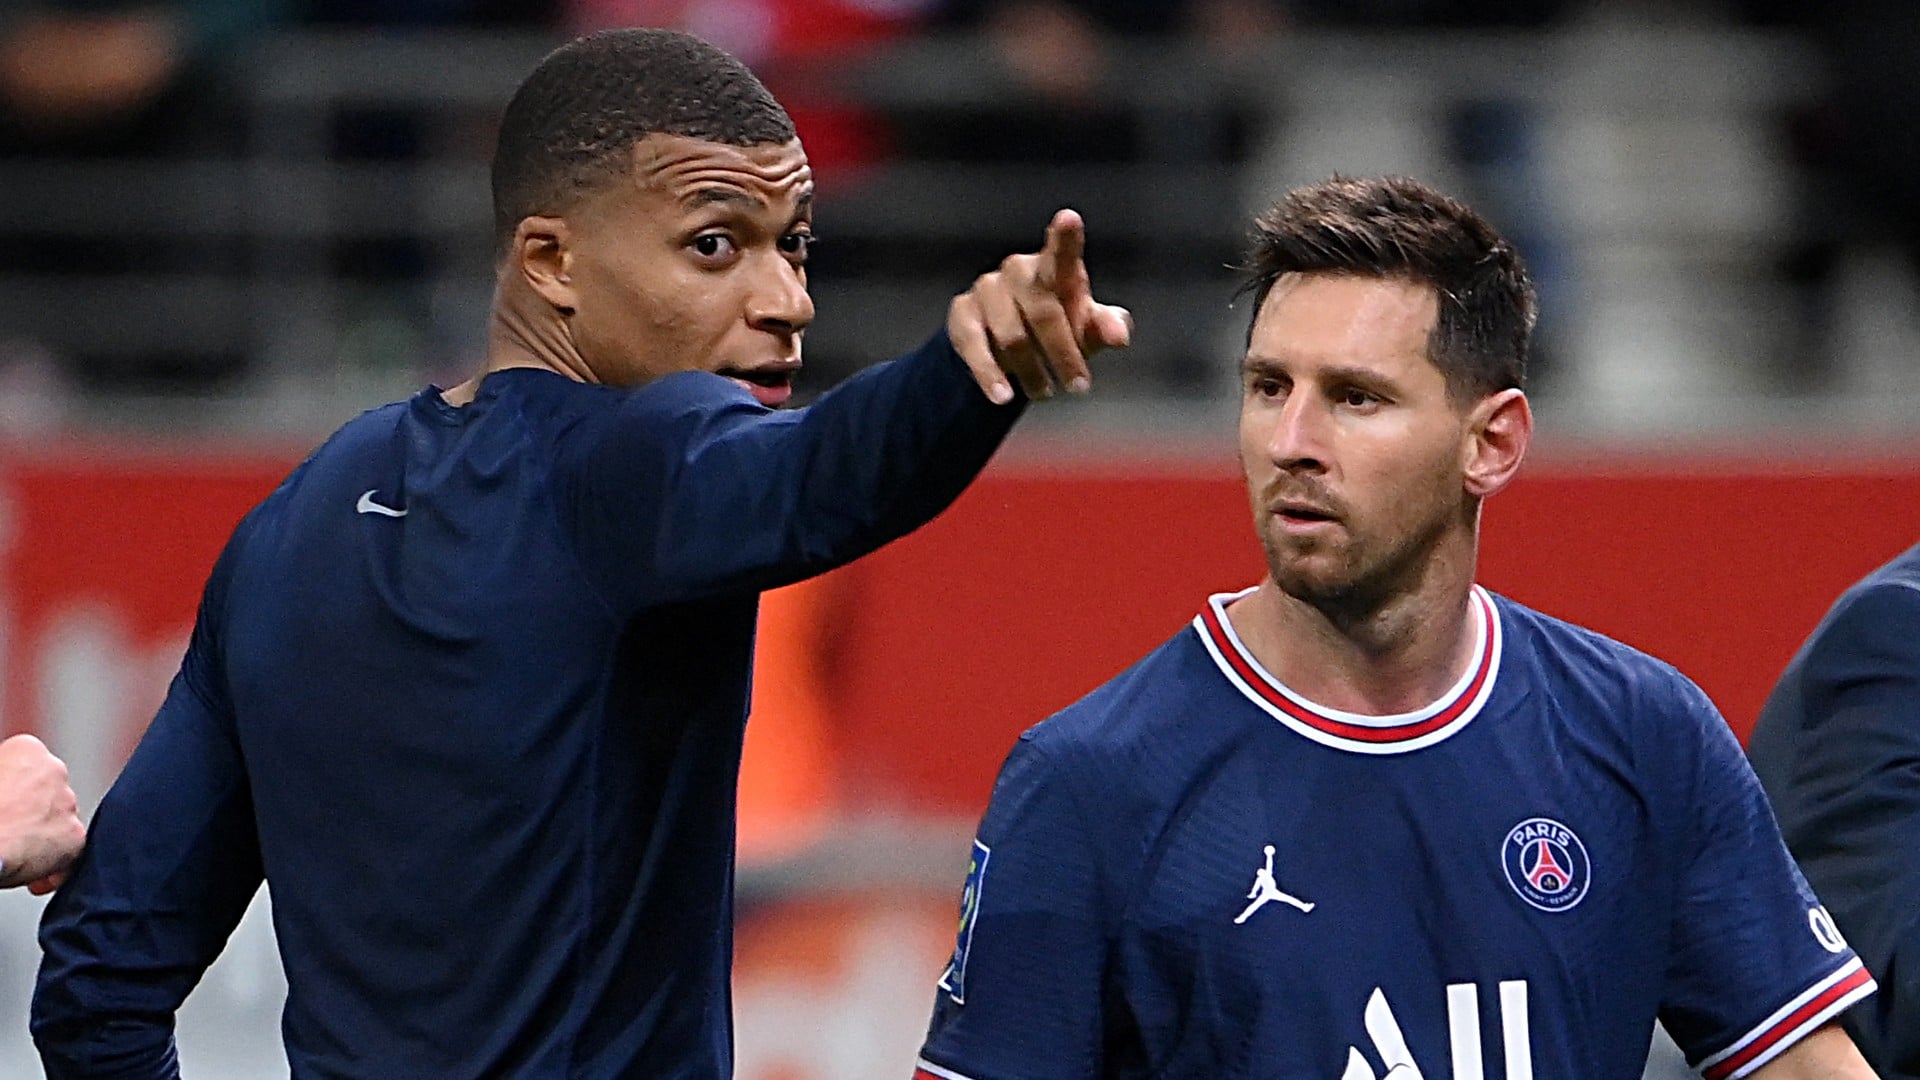 ‘I’m In Good Terms With Mbappe’ –Messi